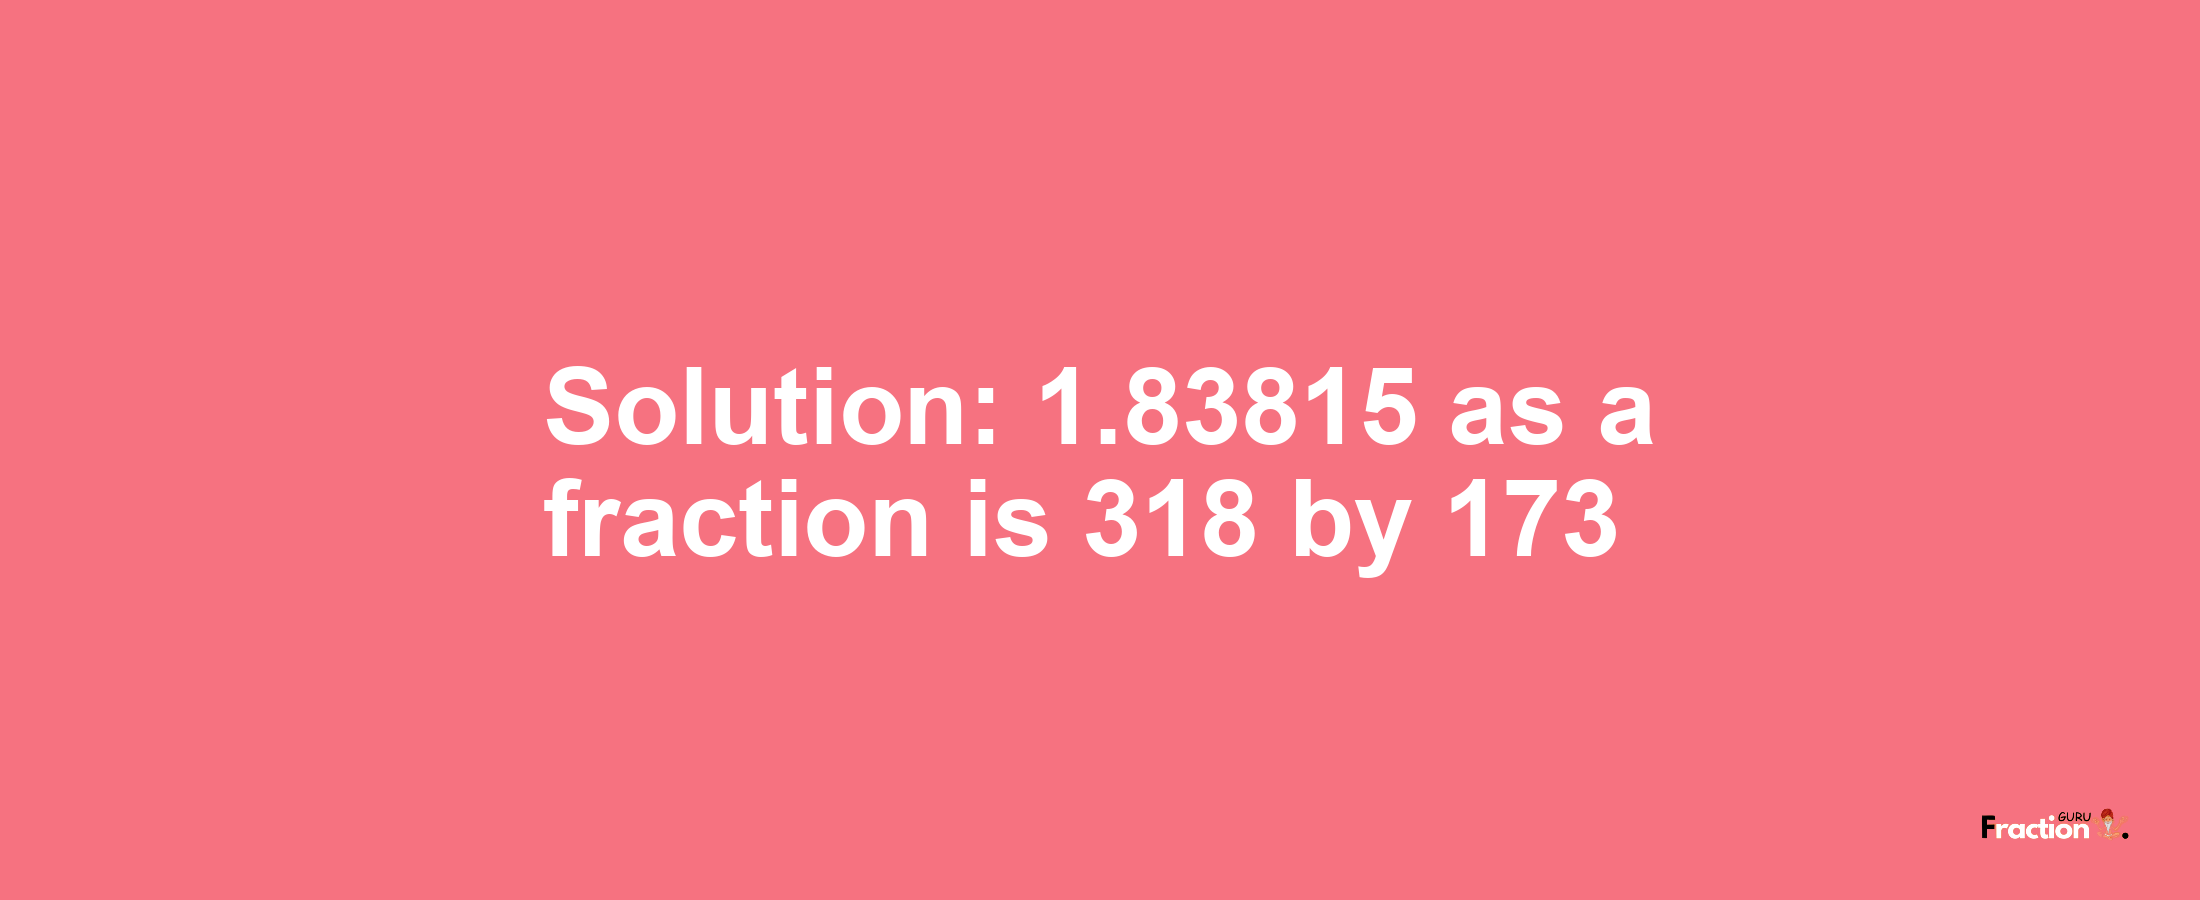 Solution:1.83815 as a fraction is 318/173